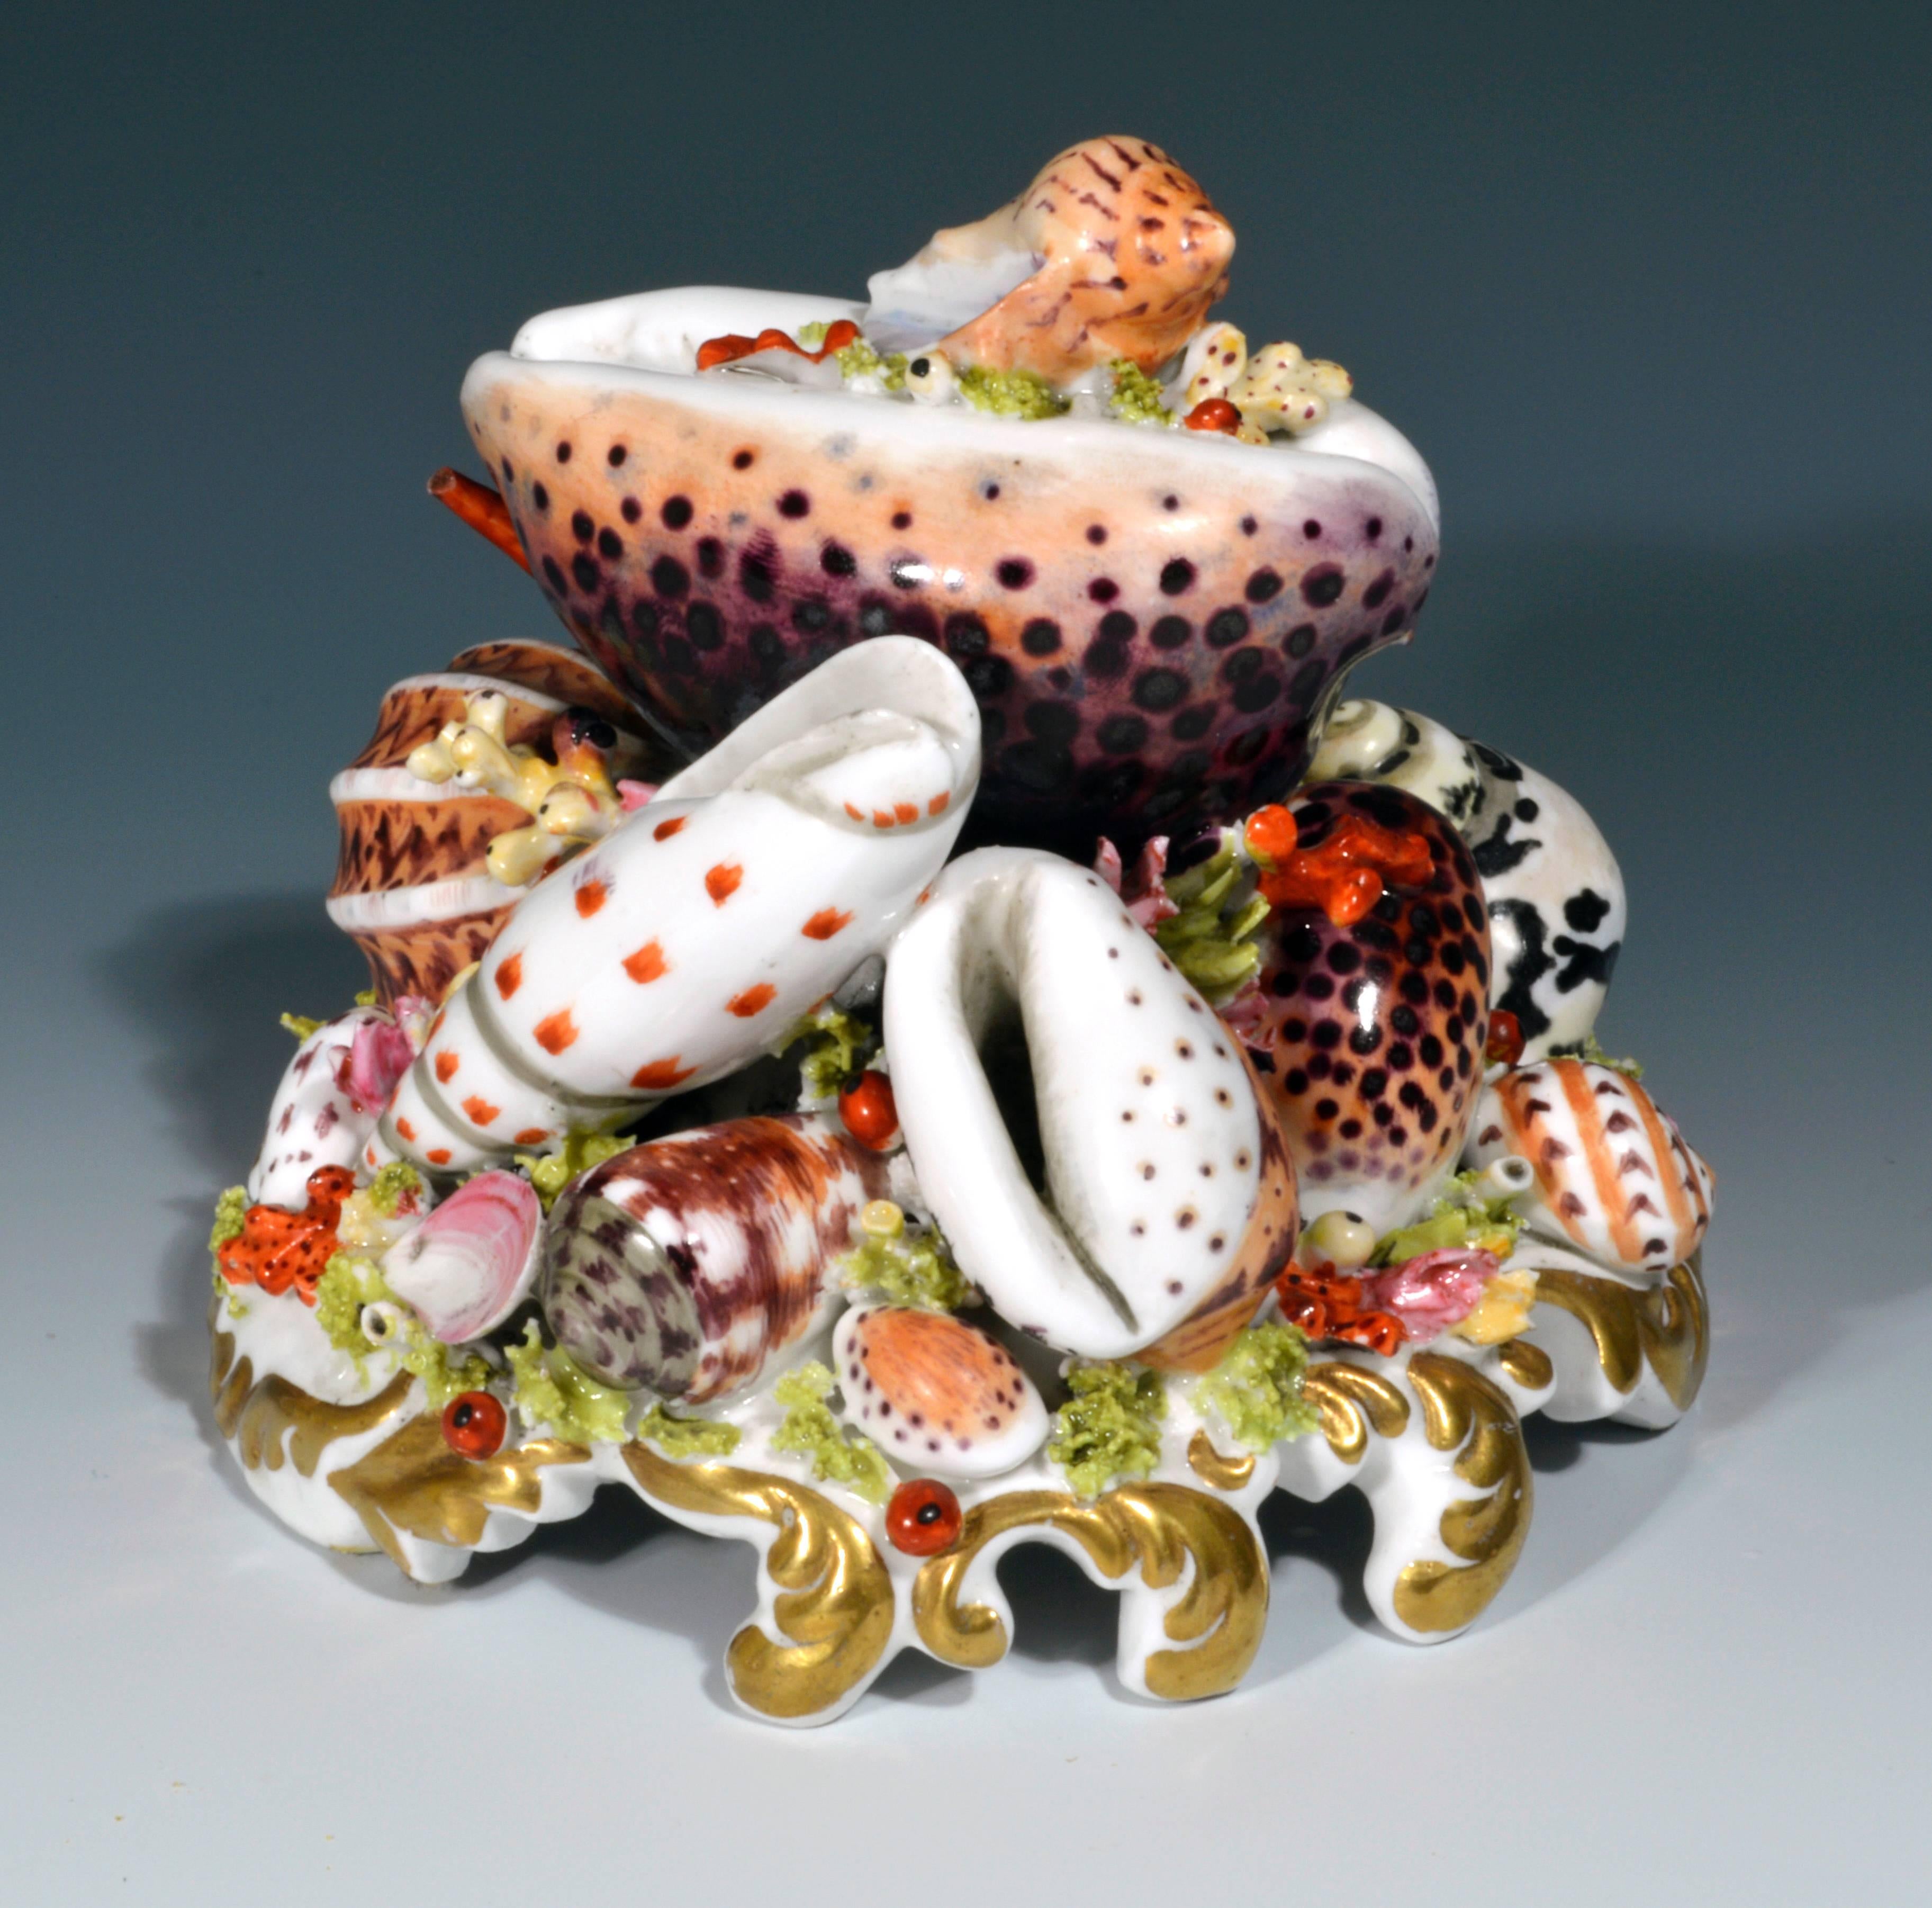 The Chamberlain Worcester seashell centerpiece or paperweight is a beautiful tour de force of porcelain making with a grouping of beautiful naturalistic sea shells representing many different species piled carefully on an openwork circular gilded